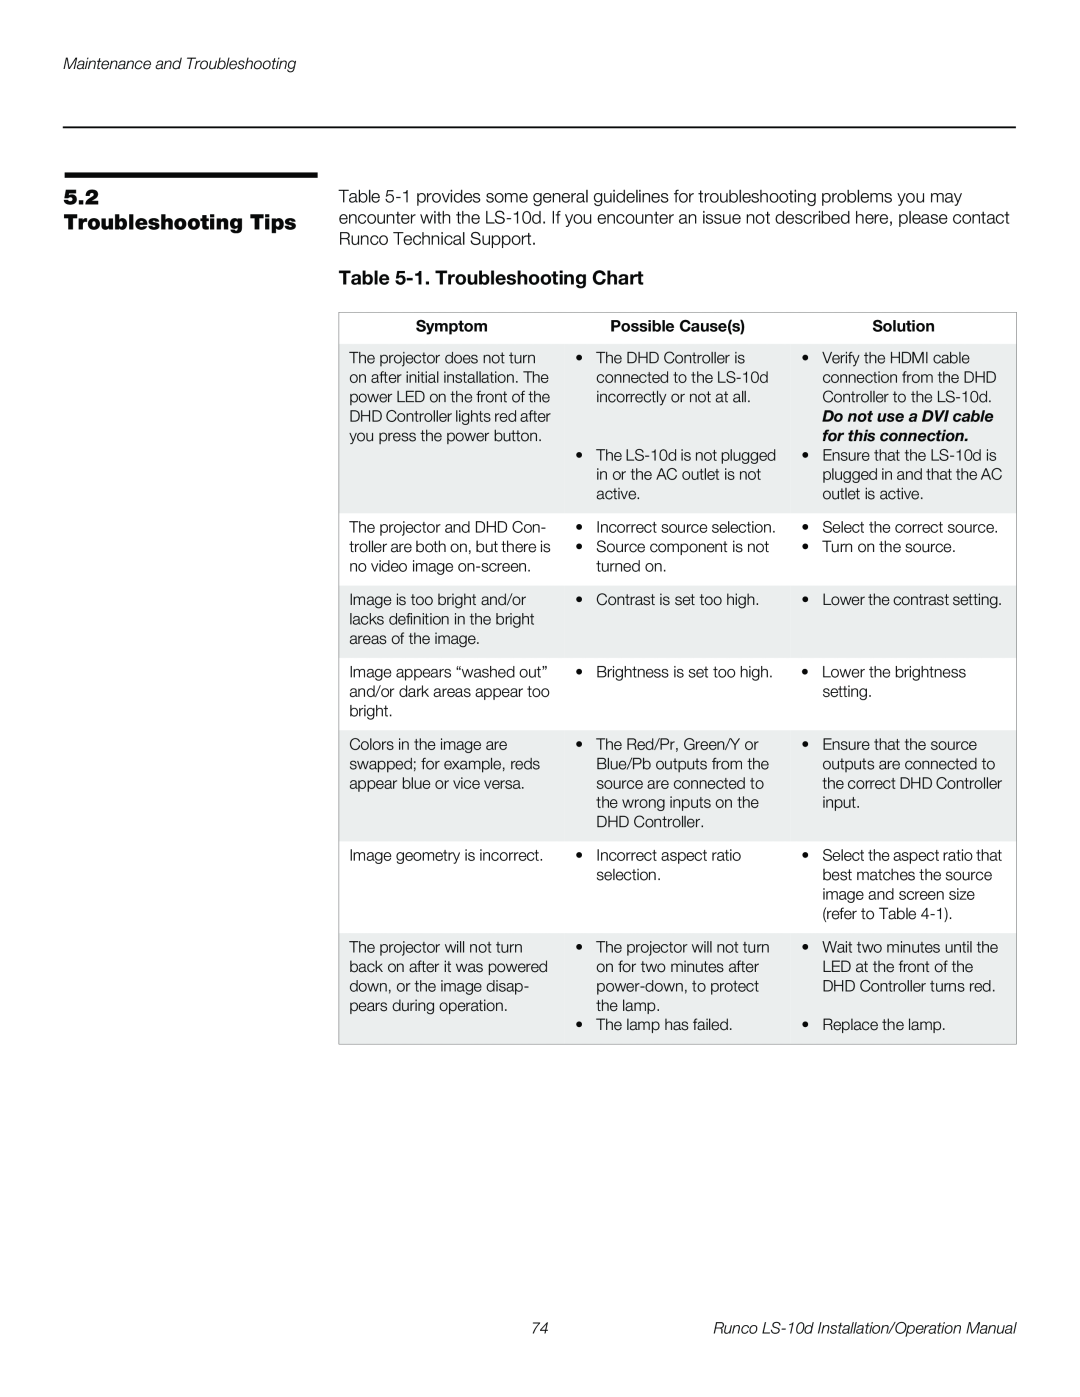 Runco LS-10D Troubleshooting Tips, 1. Troubleshooting Chart, Maintenance and Troubleshooting, Symptom, Possible Causes 